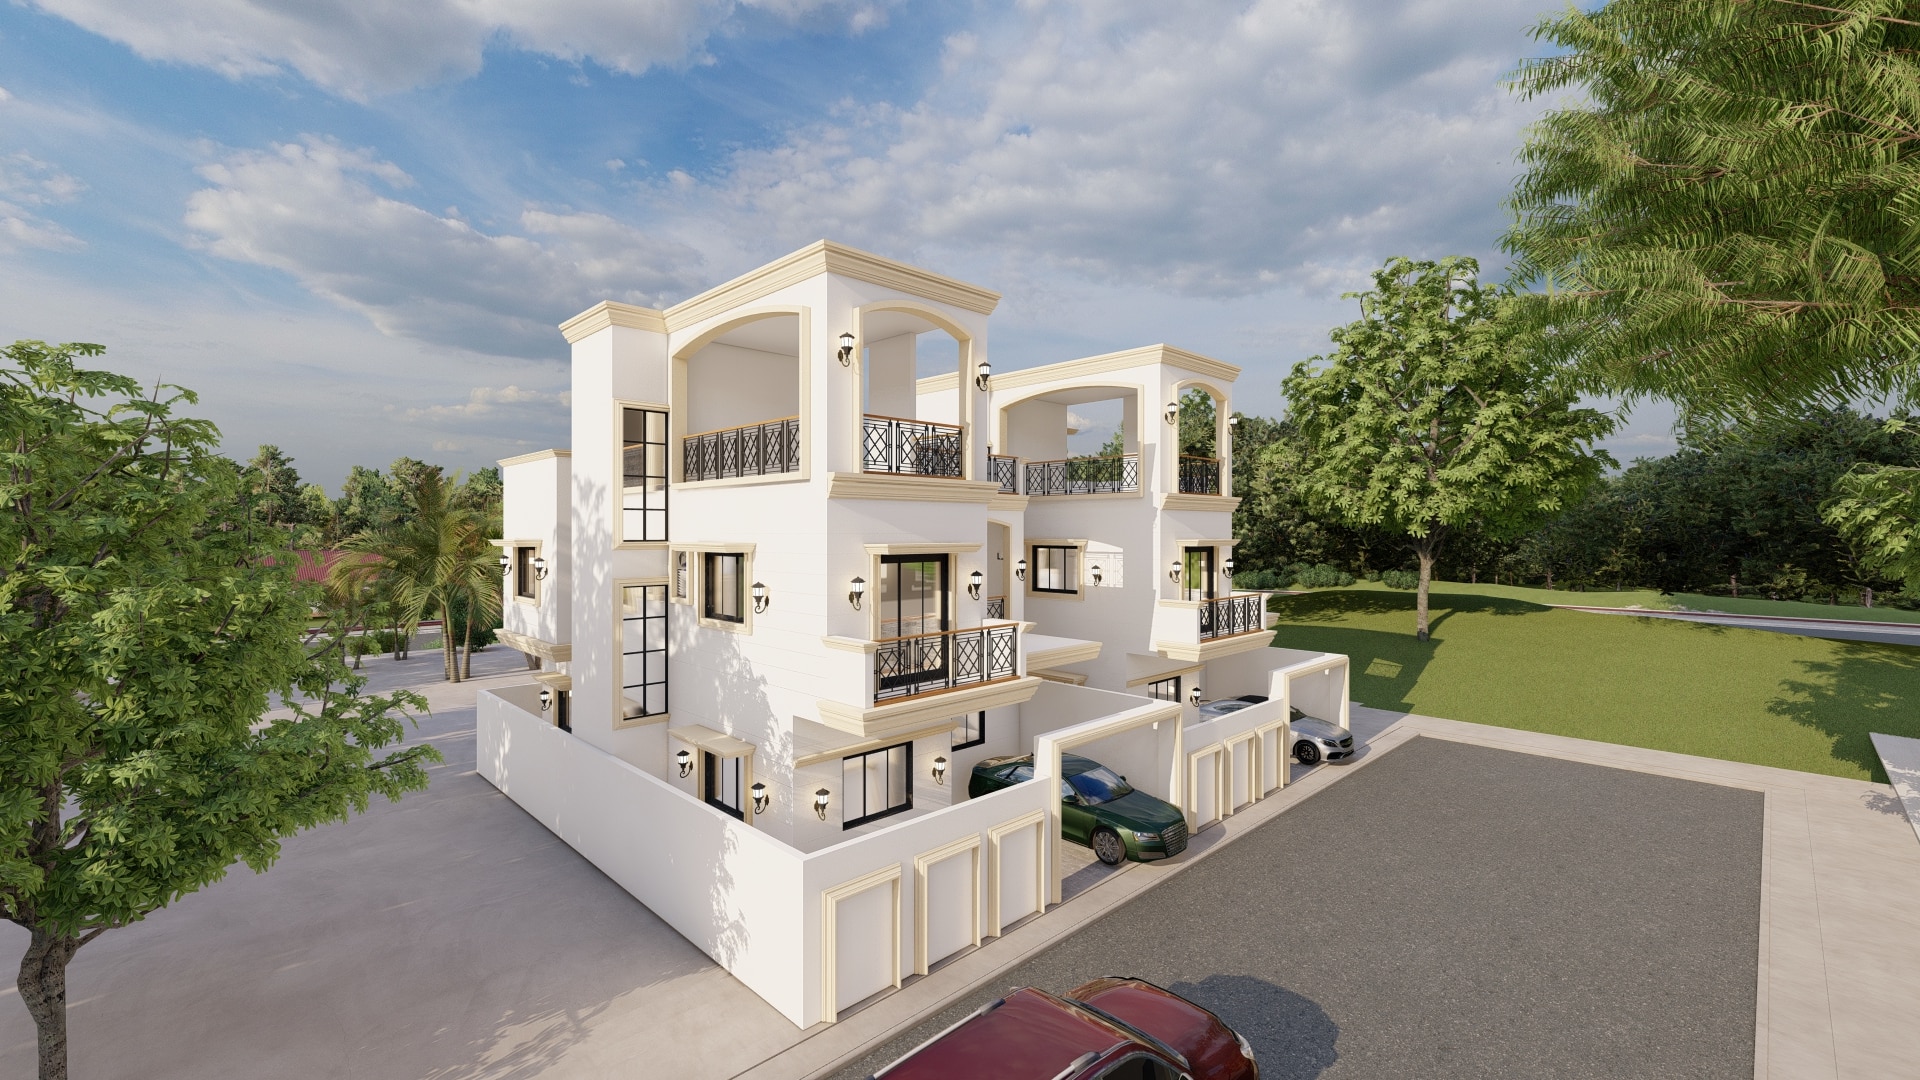 side elevation of luxury bungalow home design urban terrace east facing 30x50 sq